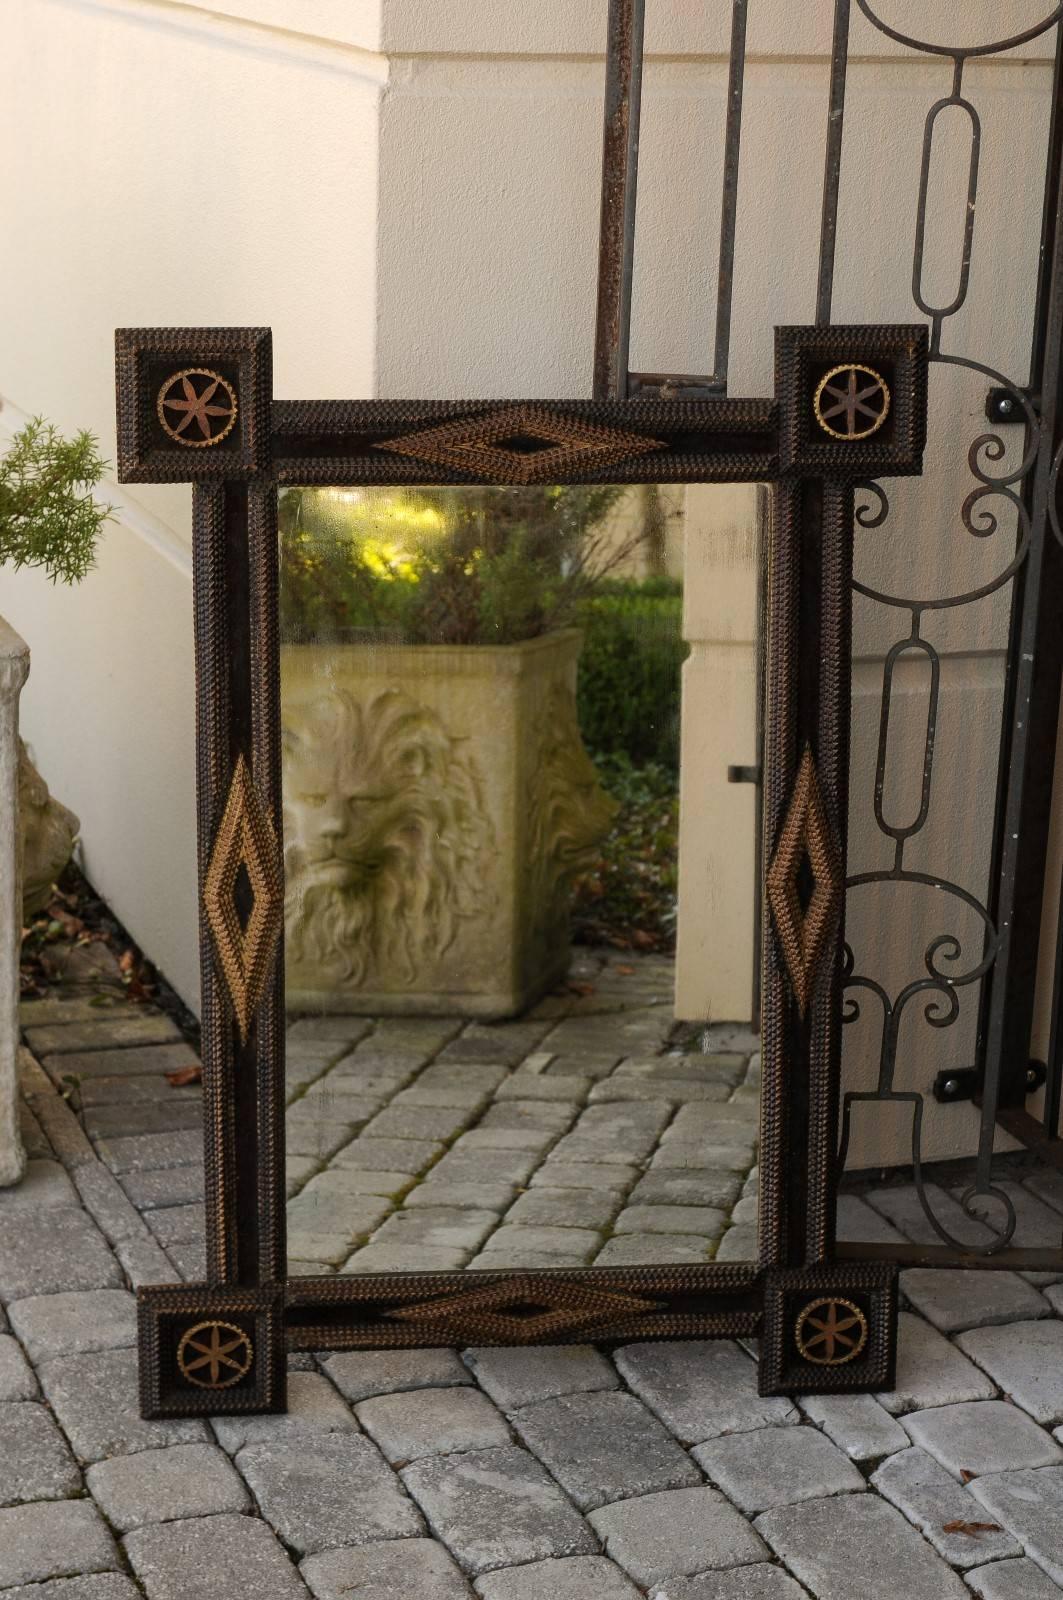 A French turn of the century Tramp Art mirror with flower shaped carved medallions. This French mirror was created in the early years of the 20th century in the manner typical of the Tramp Art style: hand-carved with overlapping notches, the